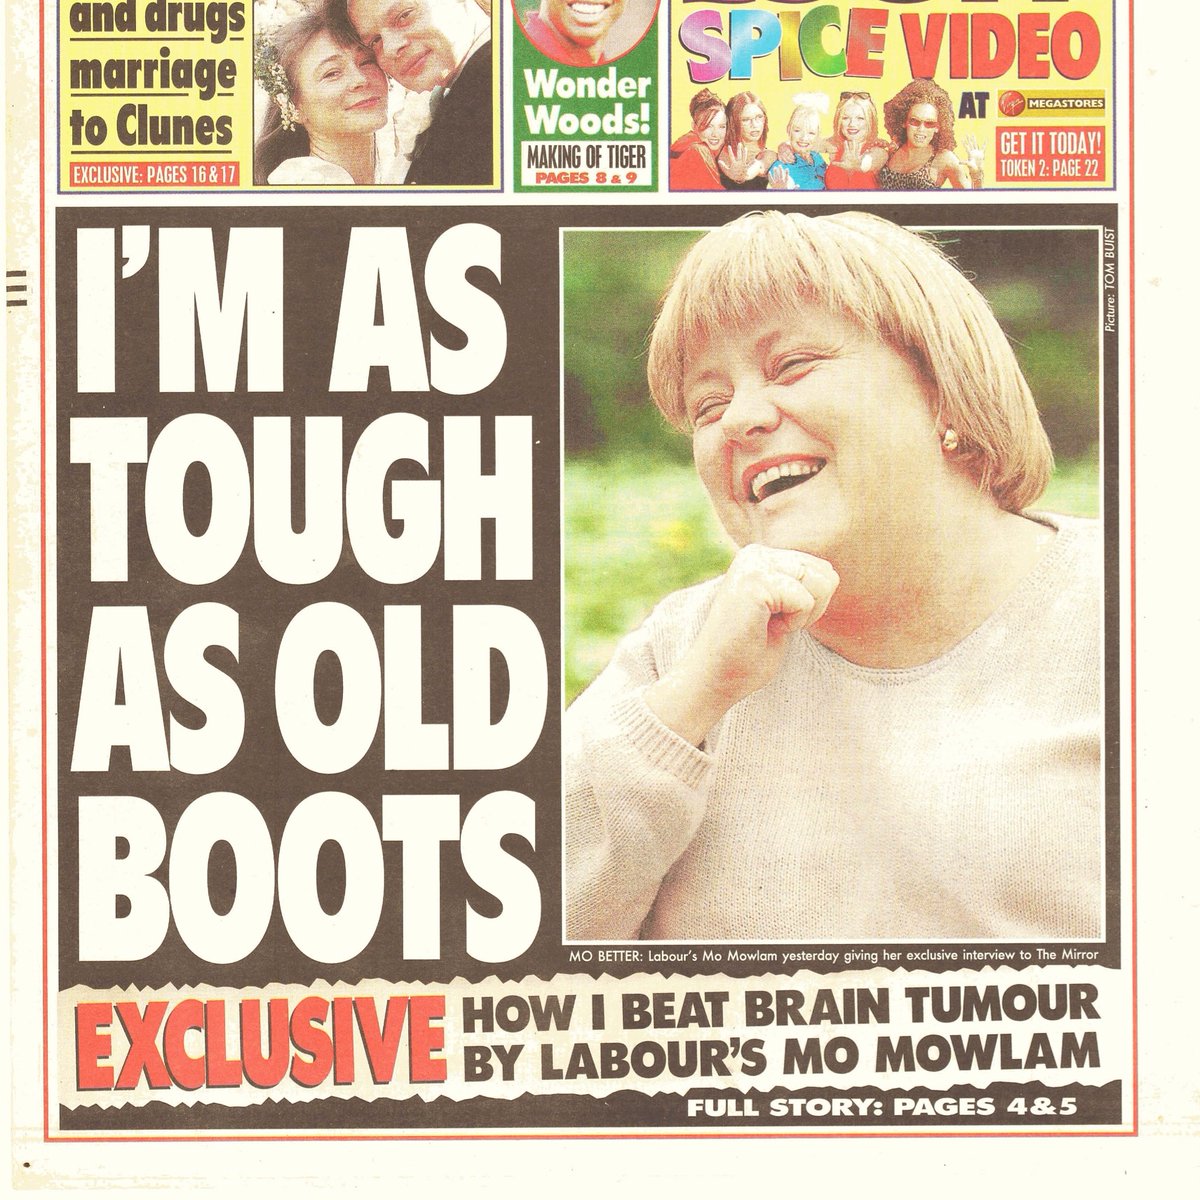 Mowlam claimed ‘as a result of the radiotherapy and accompanying steroids I have both put on weight an lost my hair’Blair added ‘I have huge admiration for her courage and the determined way in which she has kept on working. She will be a big player in a Labour government’